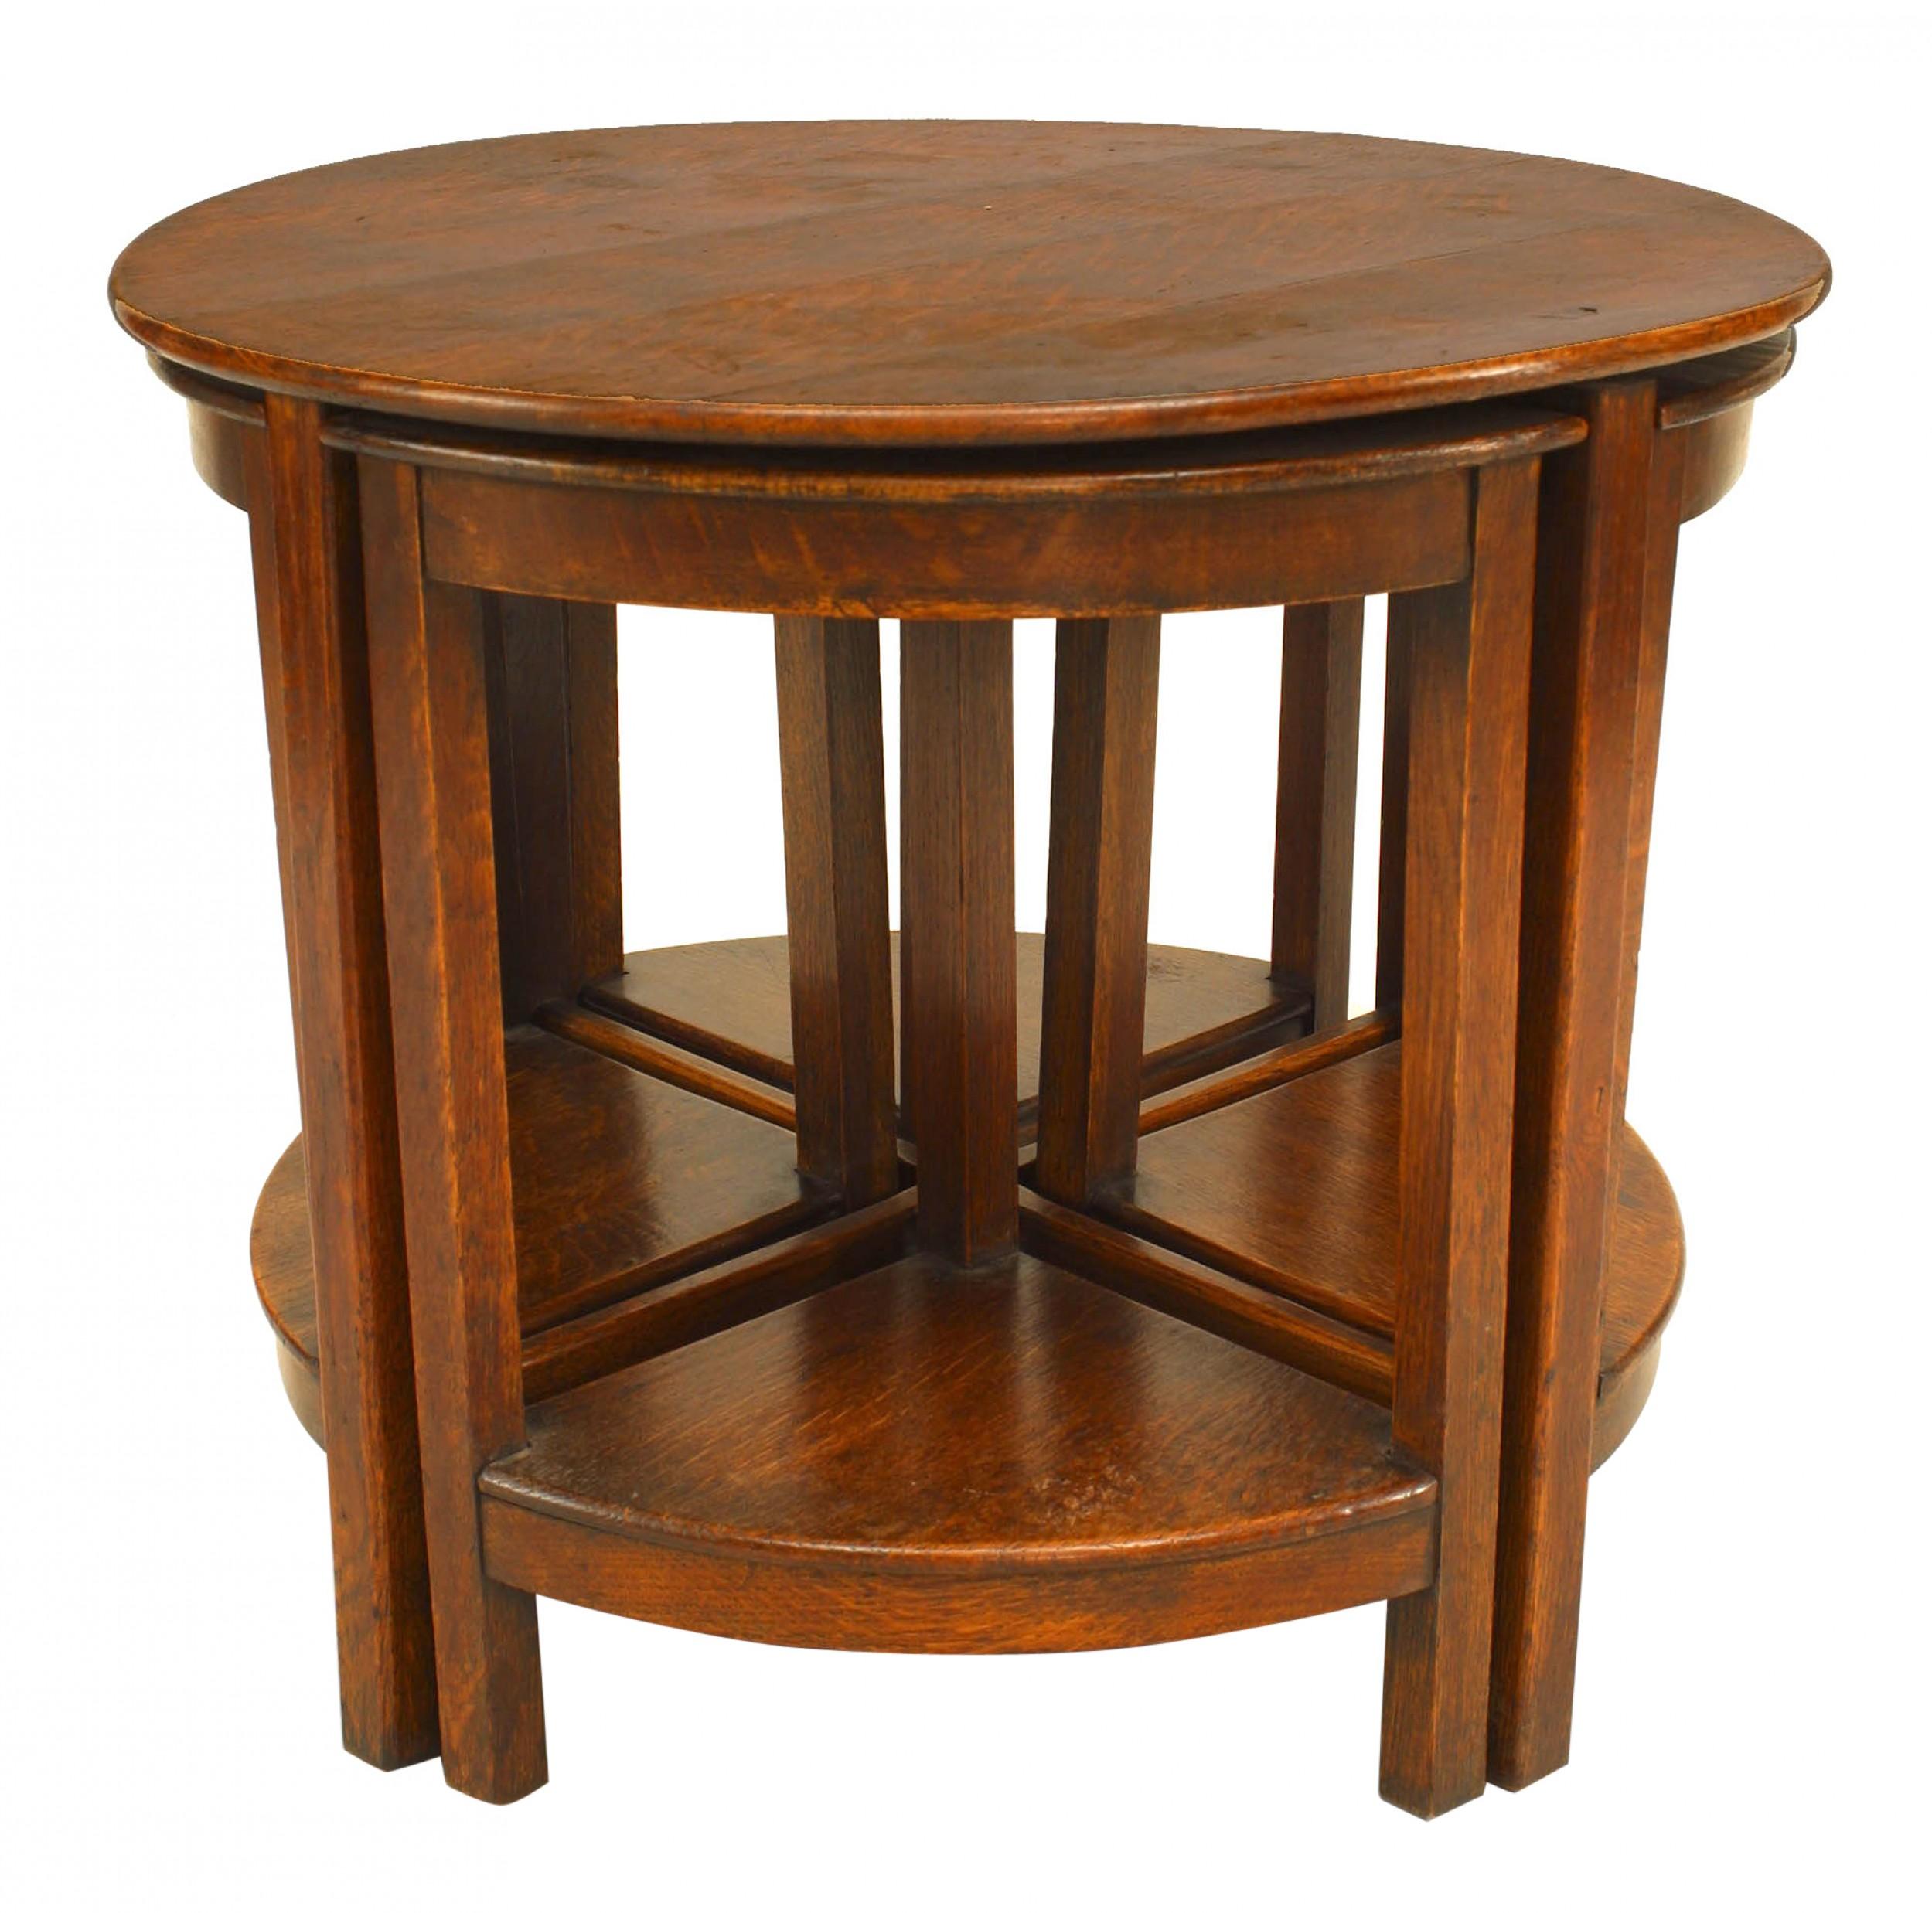 English Arts & Crafts dark stained oak round table fitted with 4 nesting triangular tray stools.
  